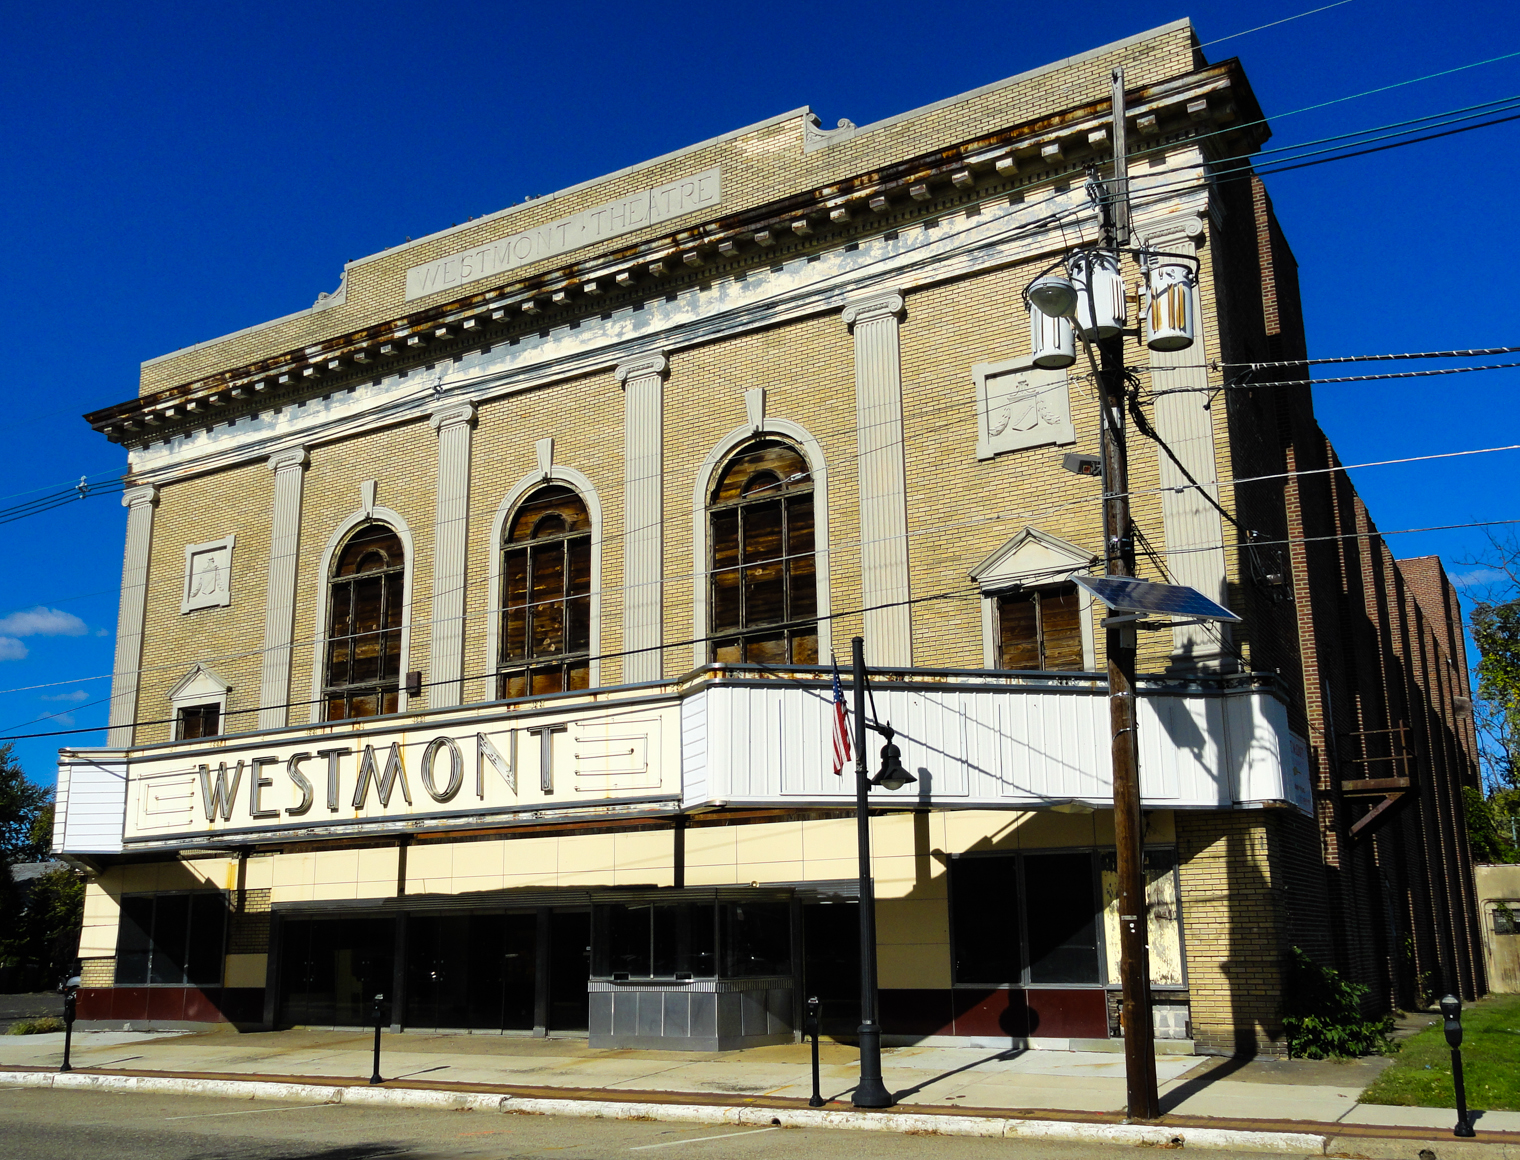 Developers for the historic Westmont Theatre say plans for the structure are still in progress. Credit: Matt Skoufalos.